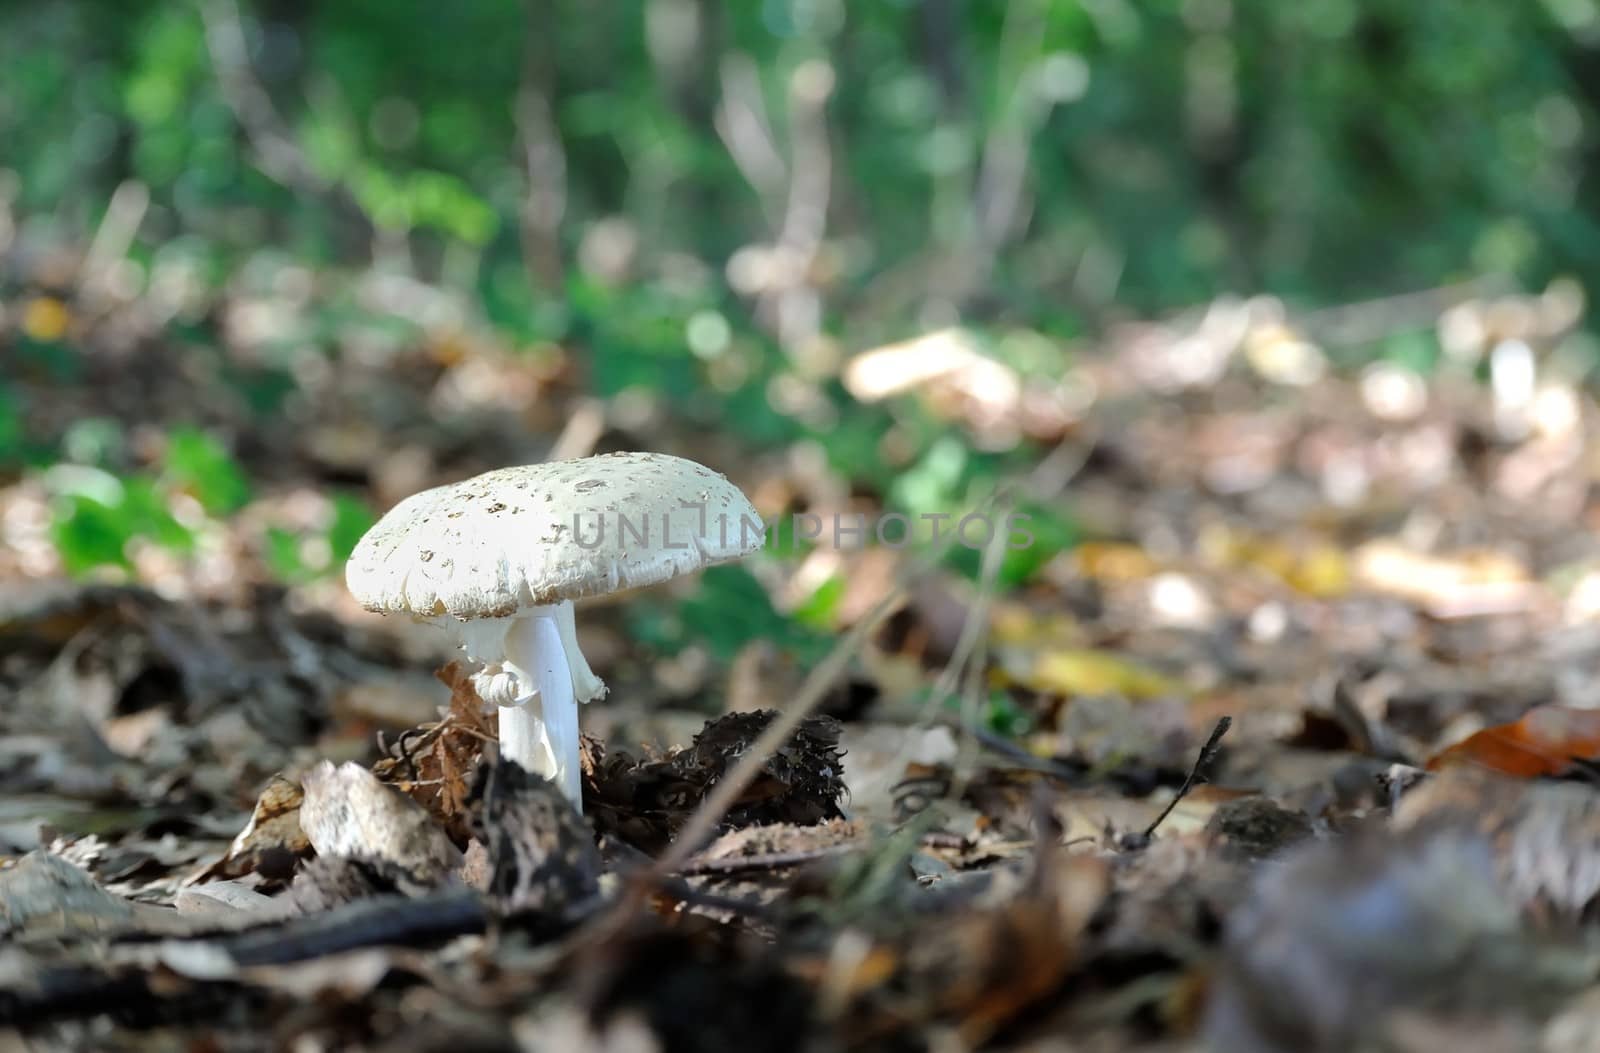 Mushroom on the floor in autumnal forest